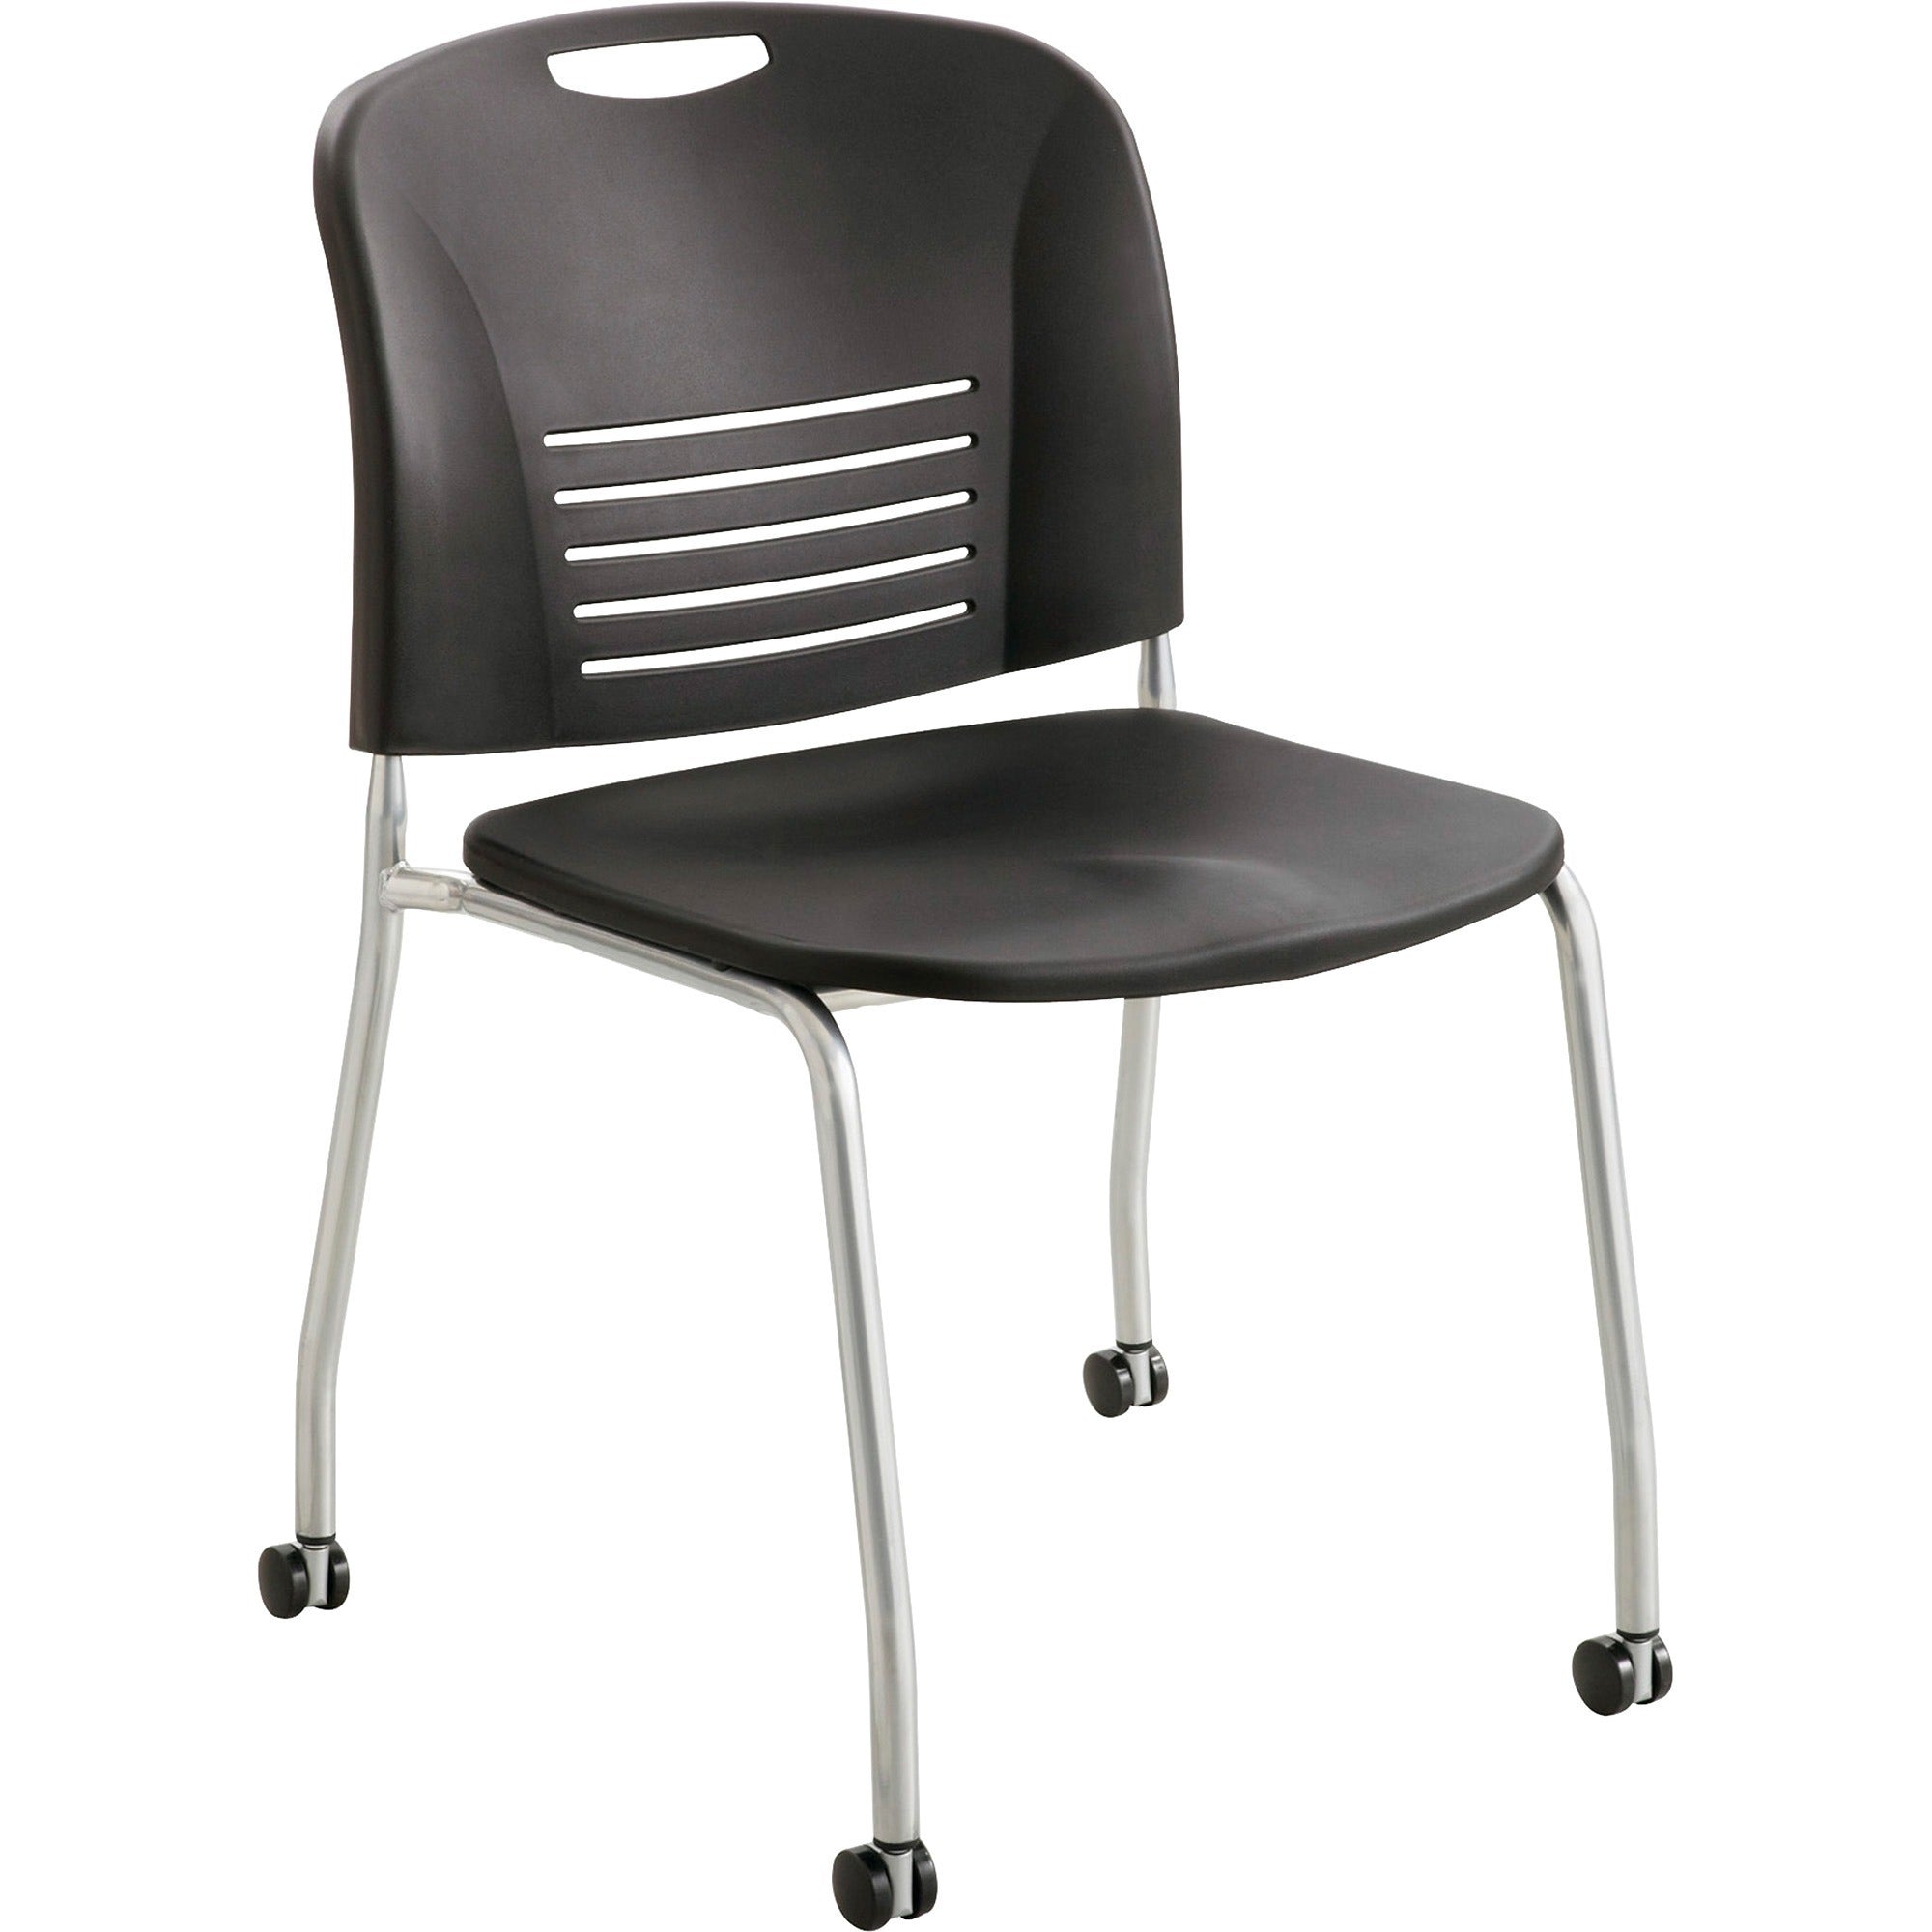 Safco Vy Straight Leg Stack Chairs with Casters - Plastic Seat - Plastic Back - Powder Coated Steel Frame - Four-legged Base - Black - Polypropylene - 2 / Carton - 